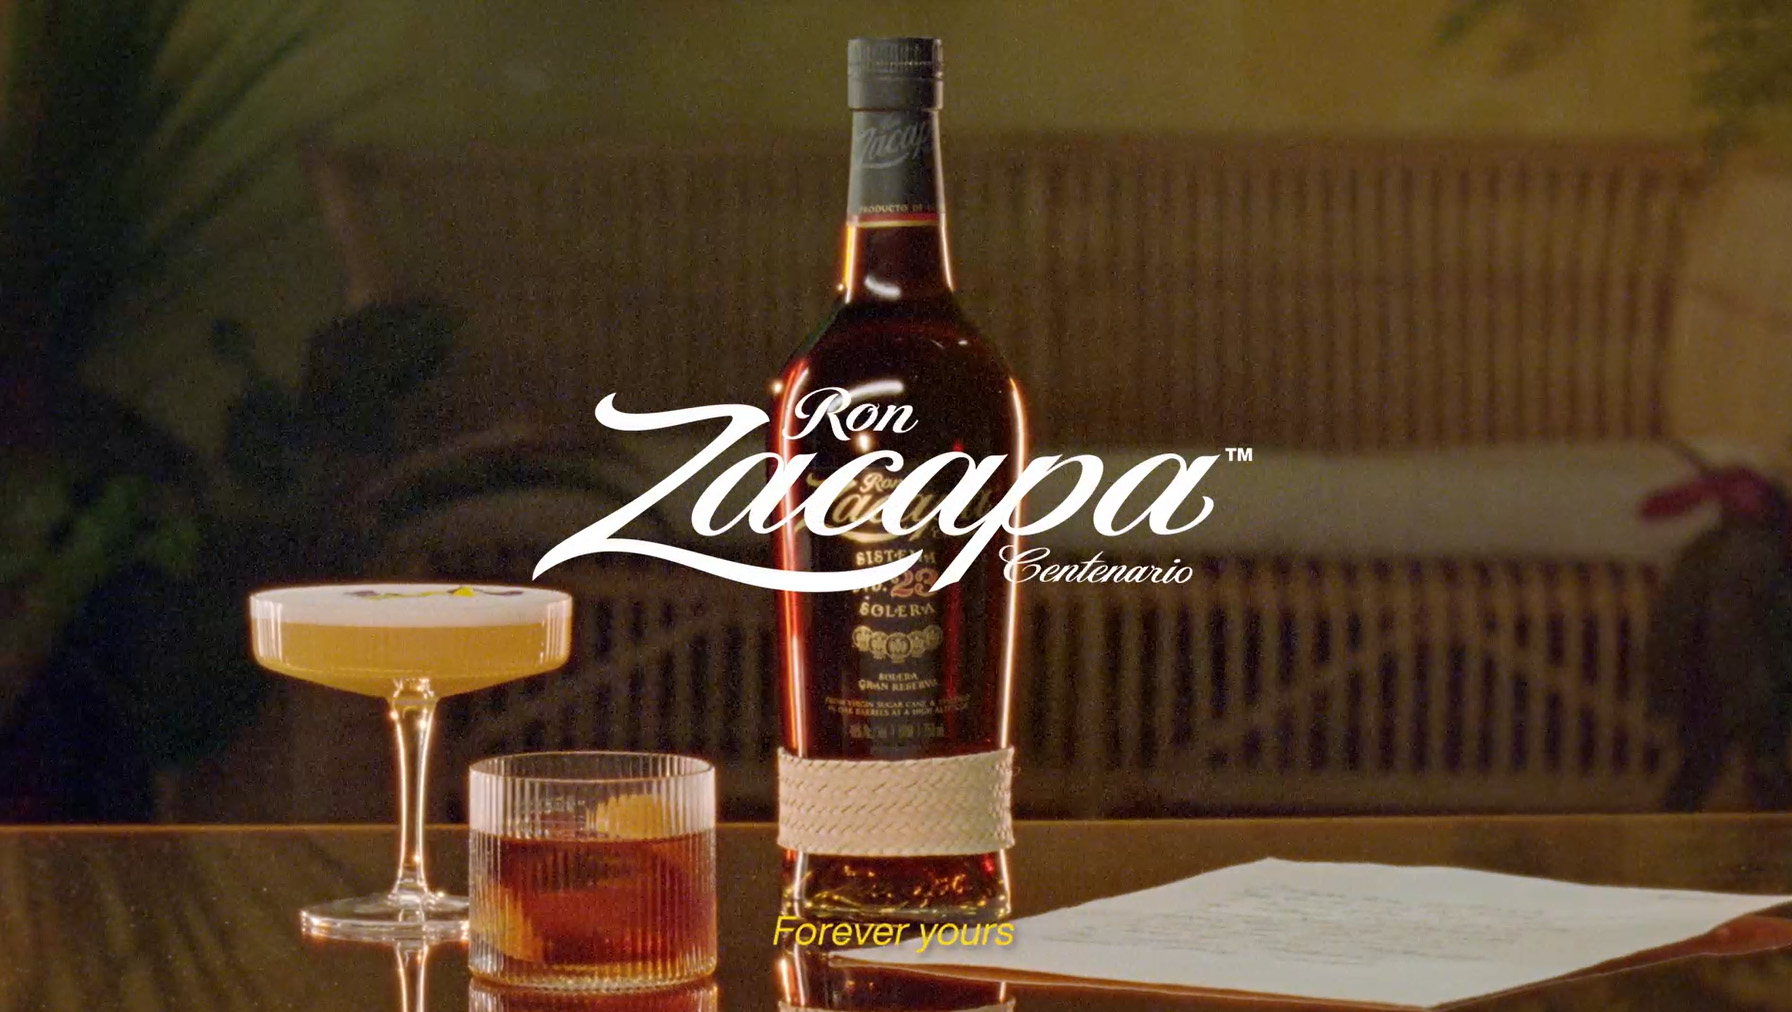 ZACAPA LAUNCHES FIRST-EVER GLOBAL CREATIVE CAMPAIGN "LIPS TO SOUL," REDEFINING THE WORLD OF DARK SPIRITS INTO A WORLD OF VIBRANT WONDER